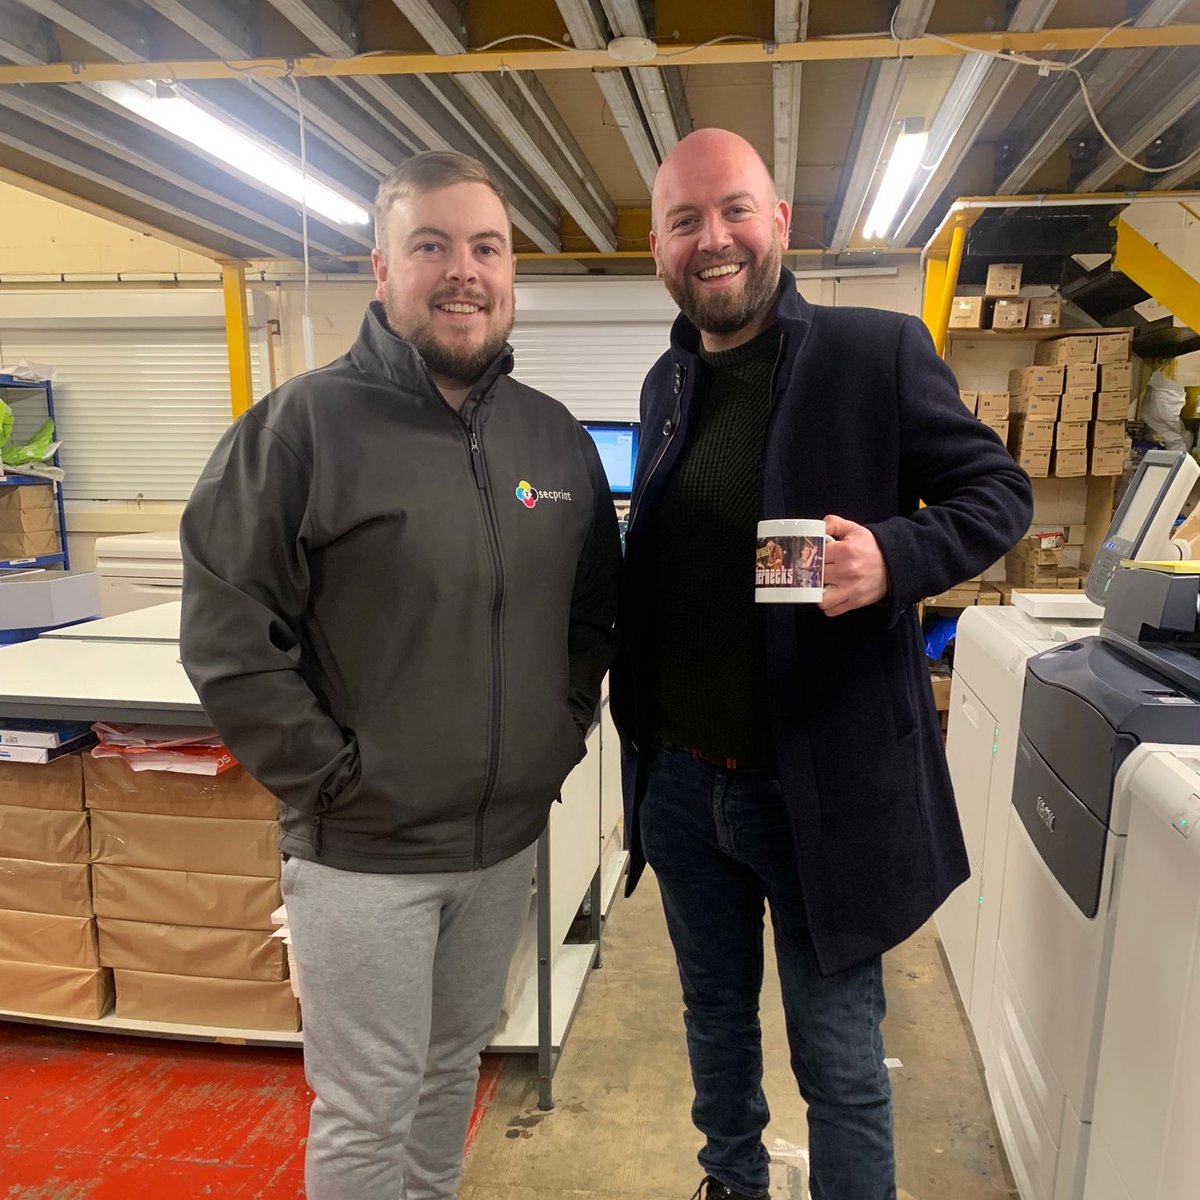 In November, our favourite Google review was written by Nick Wild! ⭐⭐⭐⭐⭐

Nick has been a valued customer of ours over the years so we decided to gift him this personalised mug.

Thanks, Nick!

#competitionuk #branding #brandedmerch